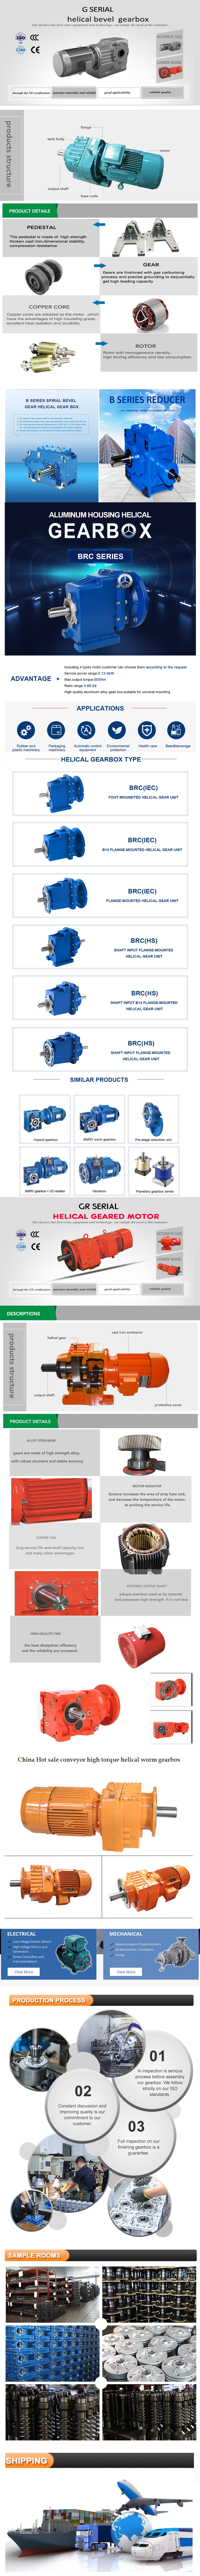   in Abomey-Calavi Benin  sales   price   shop   near me   near me shop   factory   supplier Worm Speed Reducer Nmrv 75 Worm Forward Gearbox Without Motor High Quality Forward Reverse Gearbox manufacturer   best   Cost   Custom   Cheap   wholesaler 